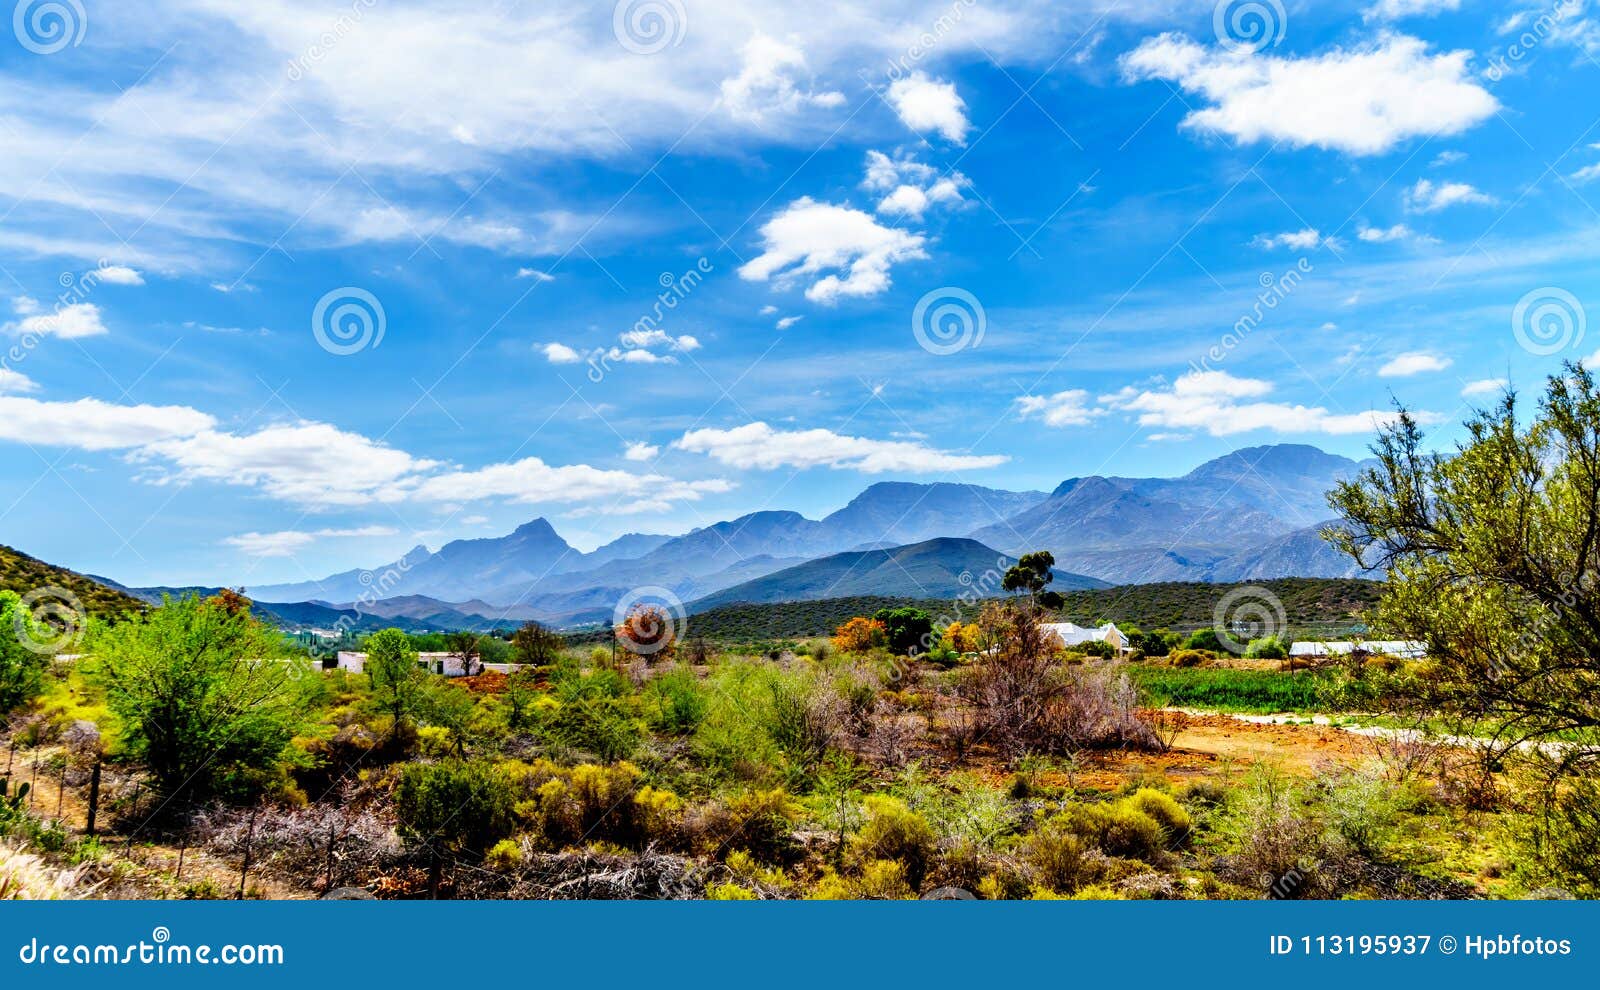 The Little Karoo Region of the Western Cape Province of South Africa ...